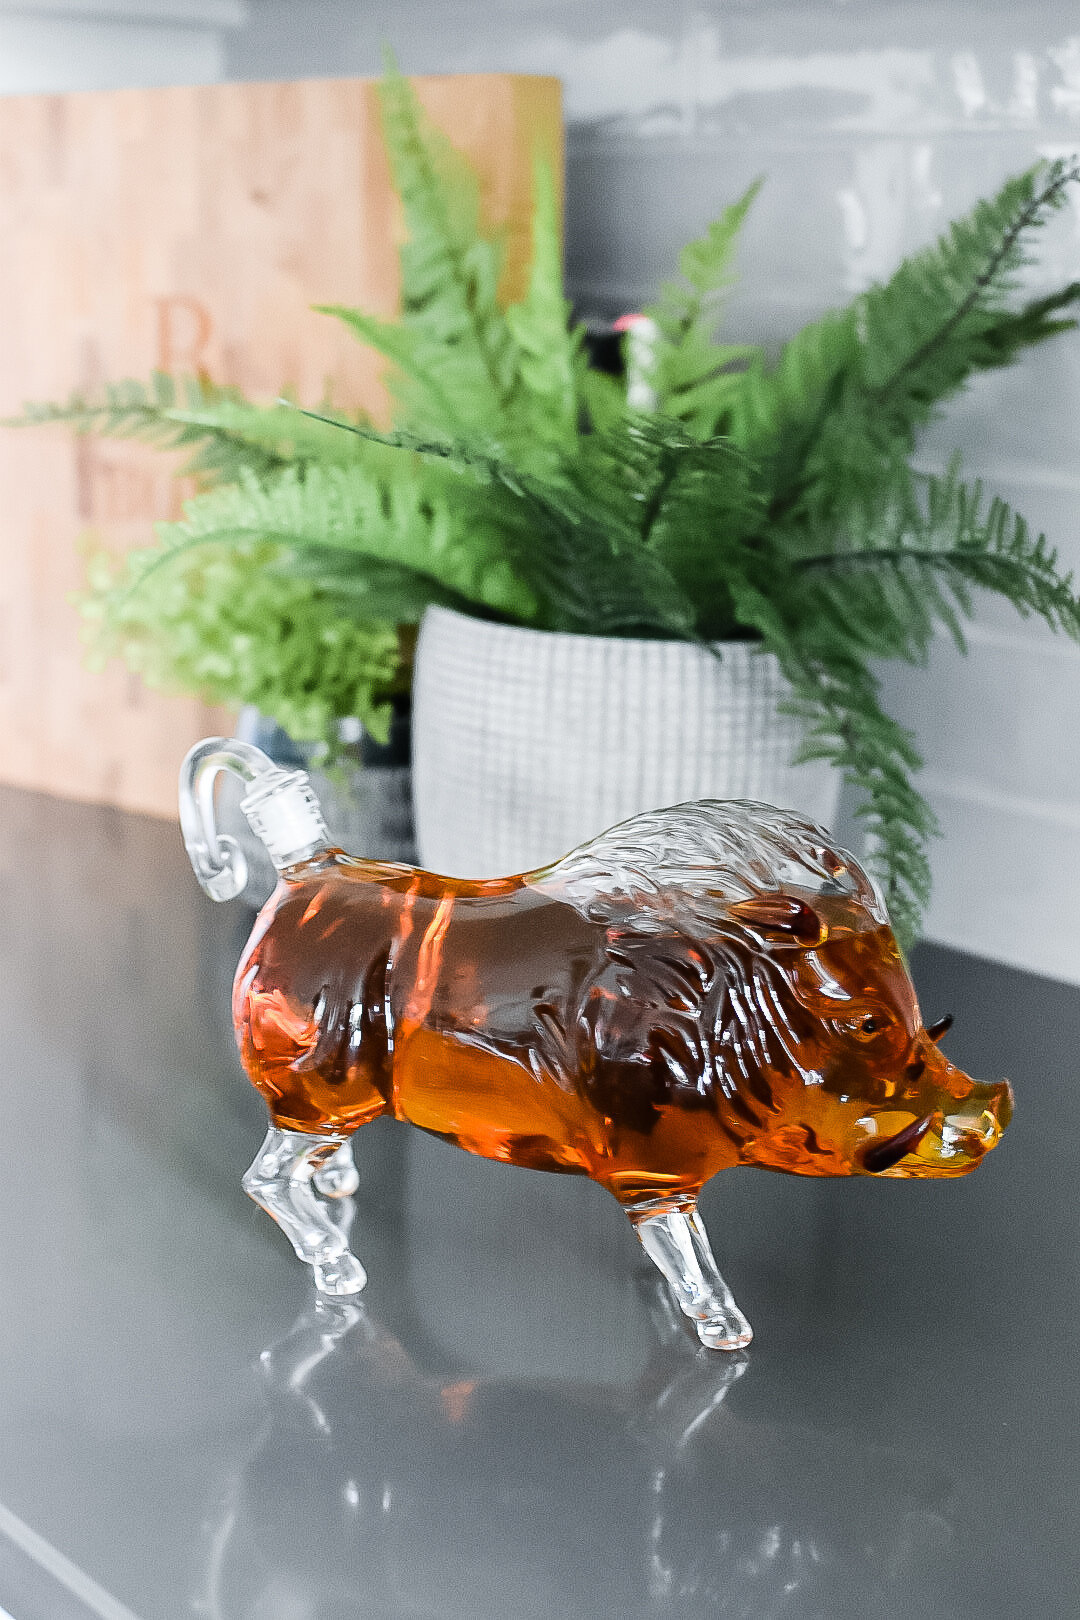 A glass statue sits in front of a potted plant on a kitchen countertop